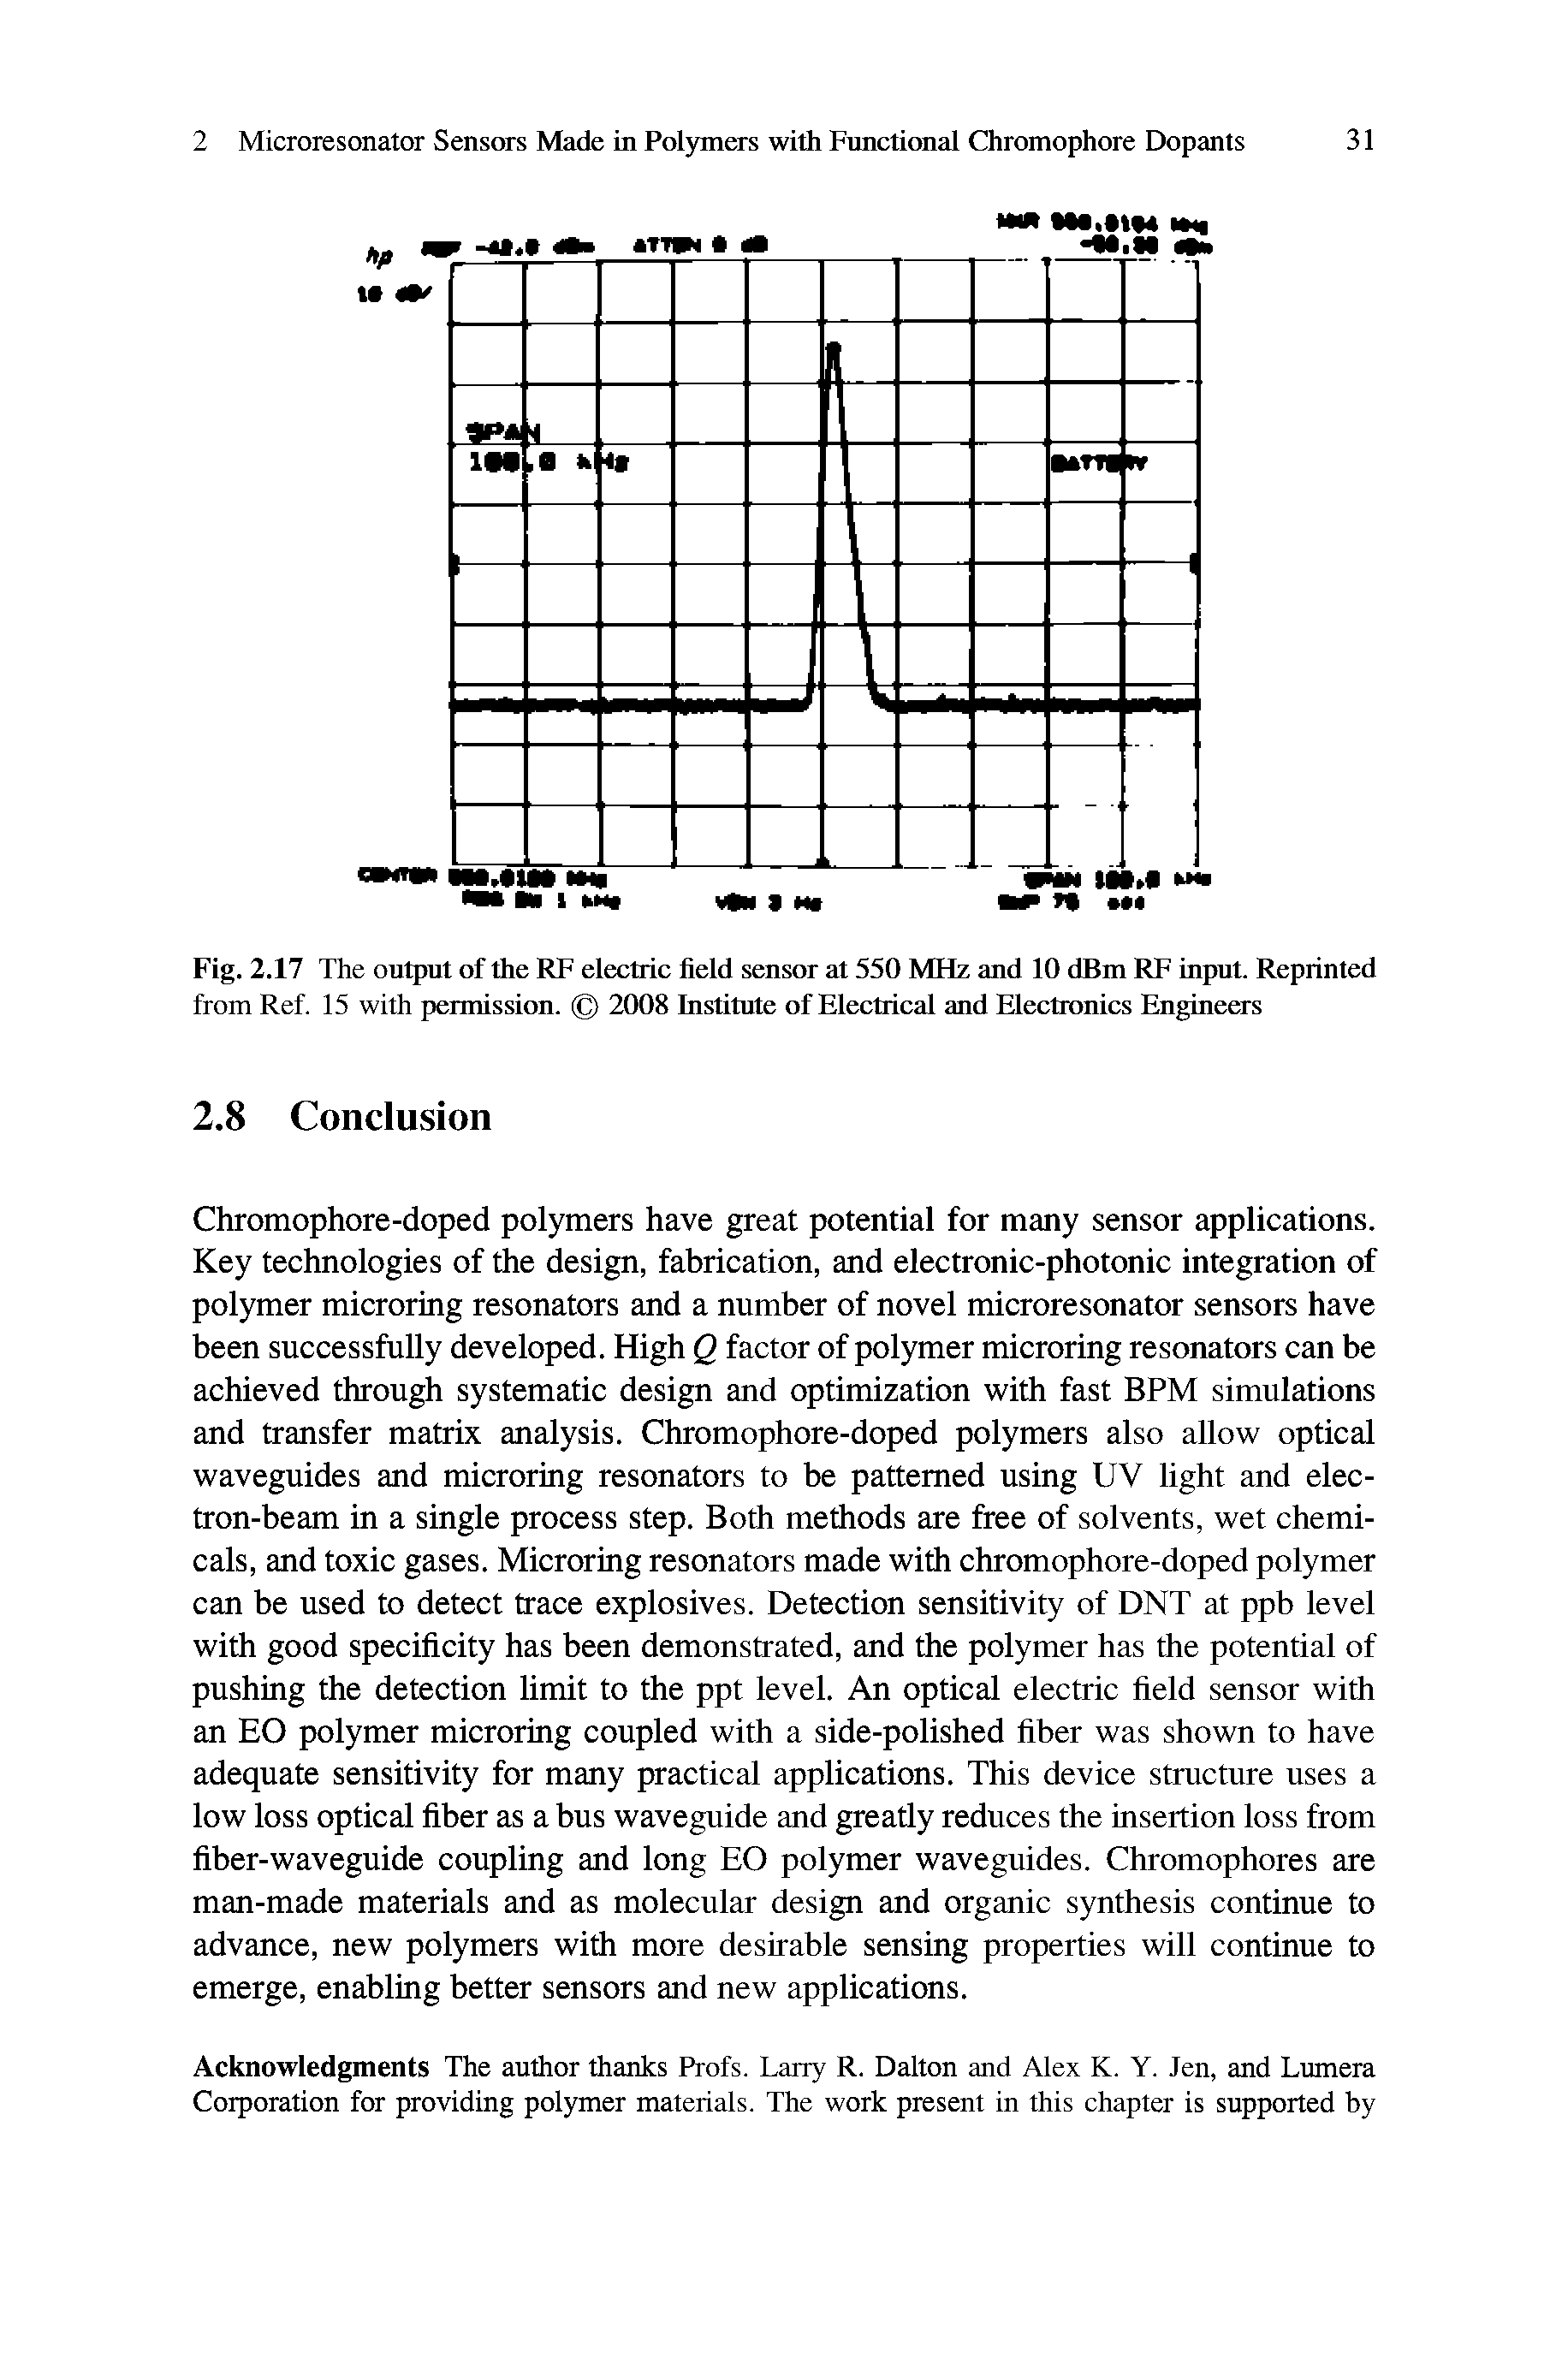 Fig. 2.17 The output of the RF electric field sensor at 550 MHz and 10 dBm RF input. Reprinted from Ref. 15 with permission. 2008 Institute of Electrical and Electronics Engineers...